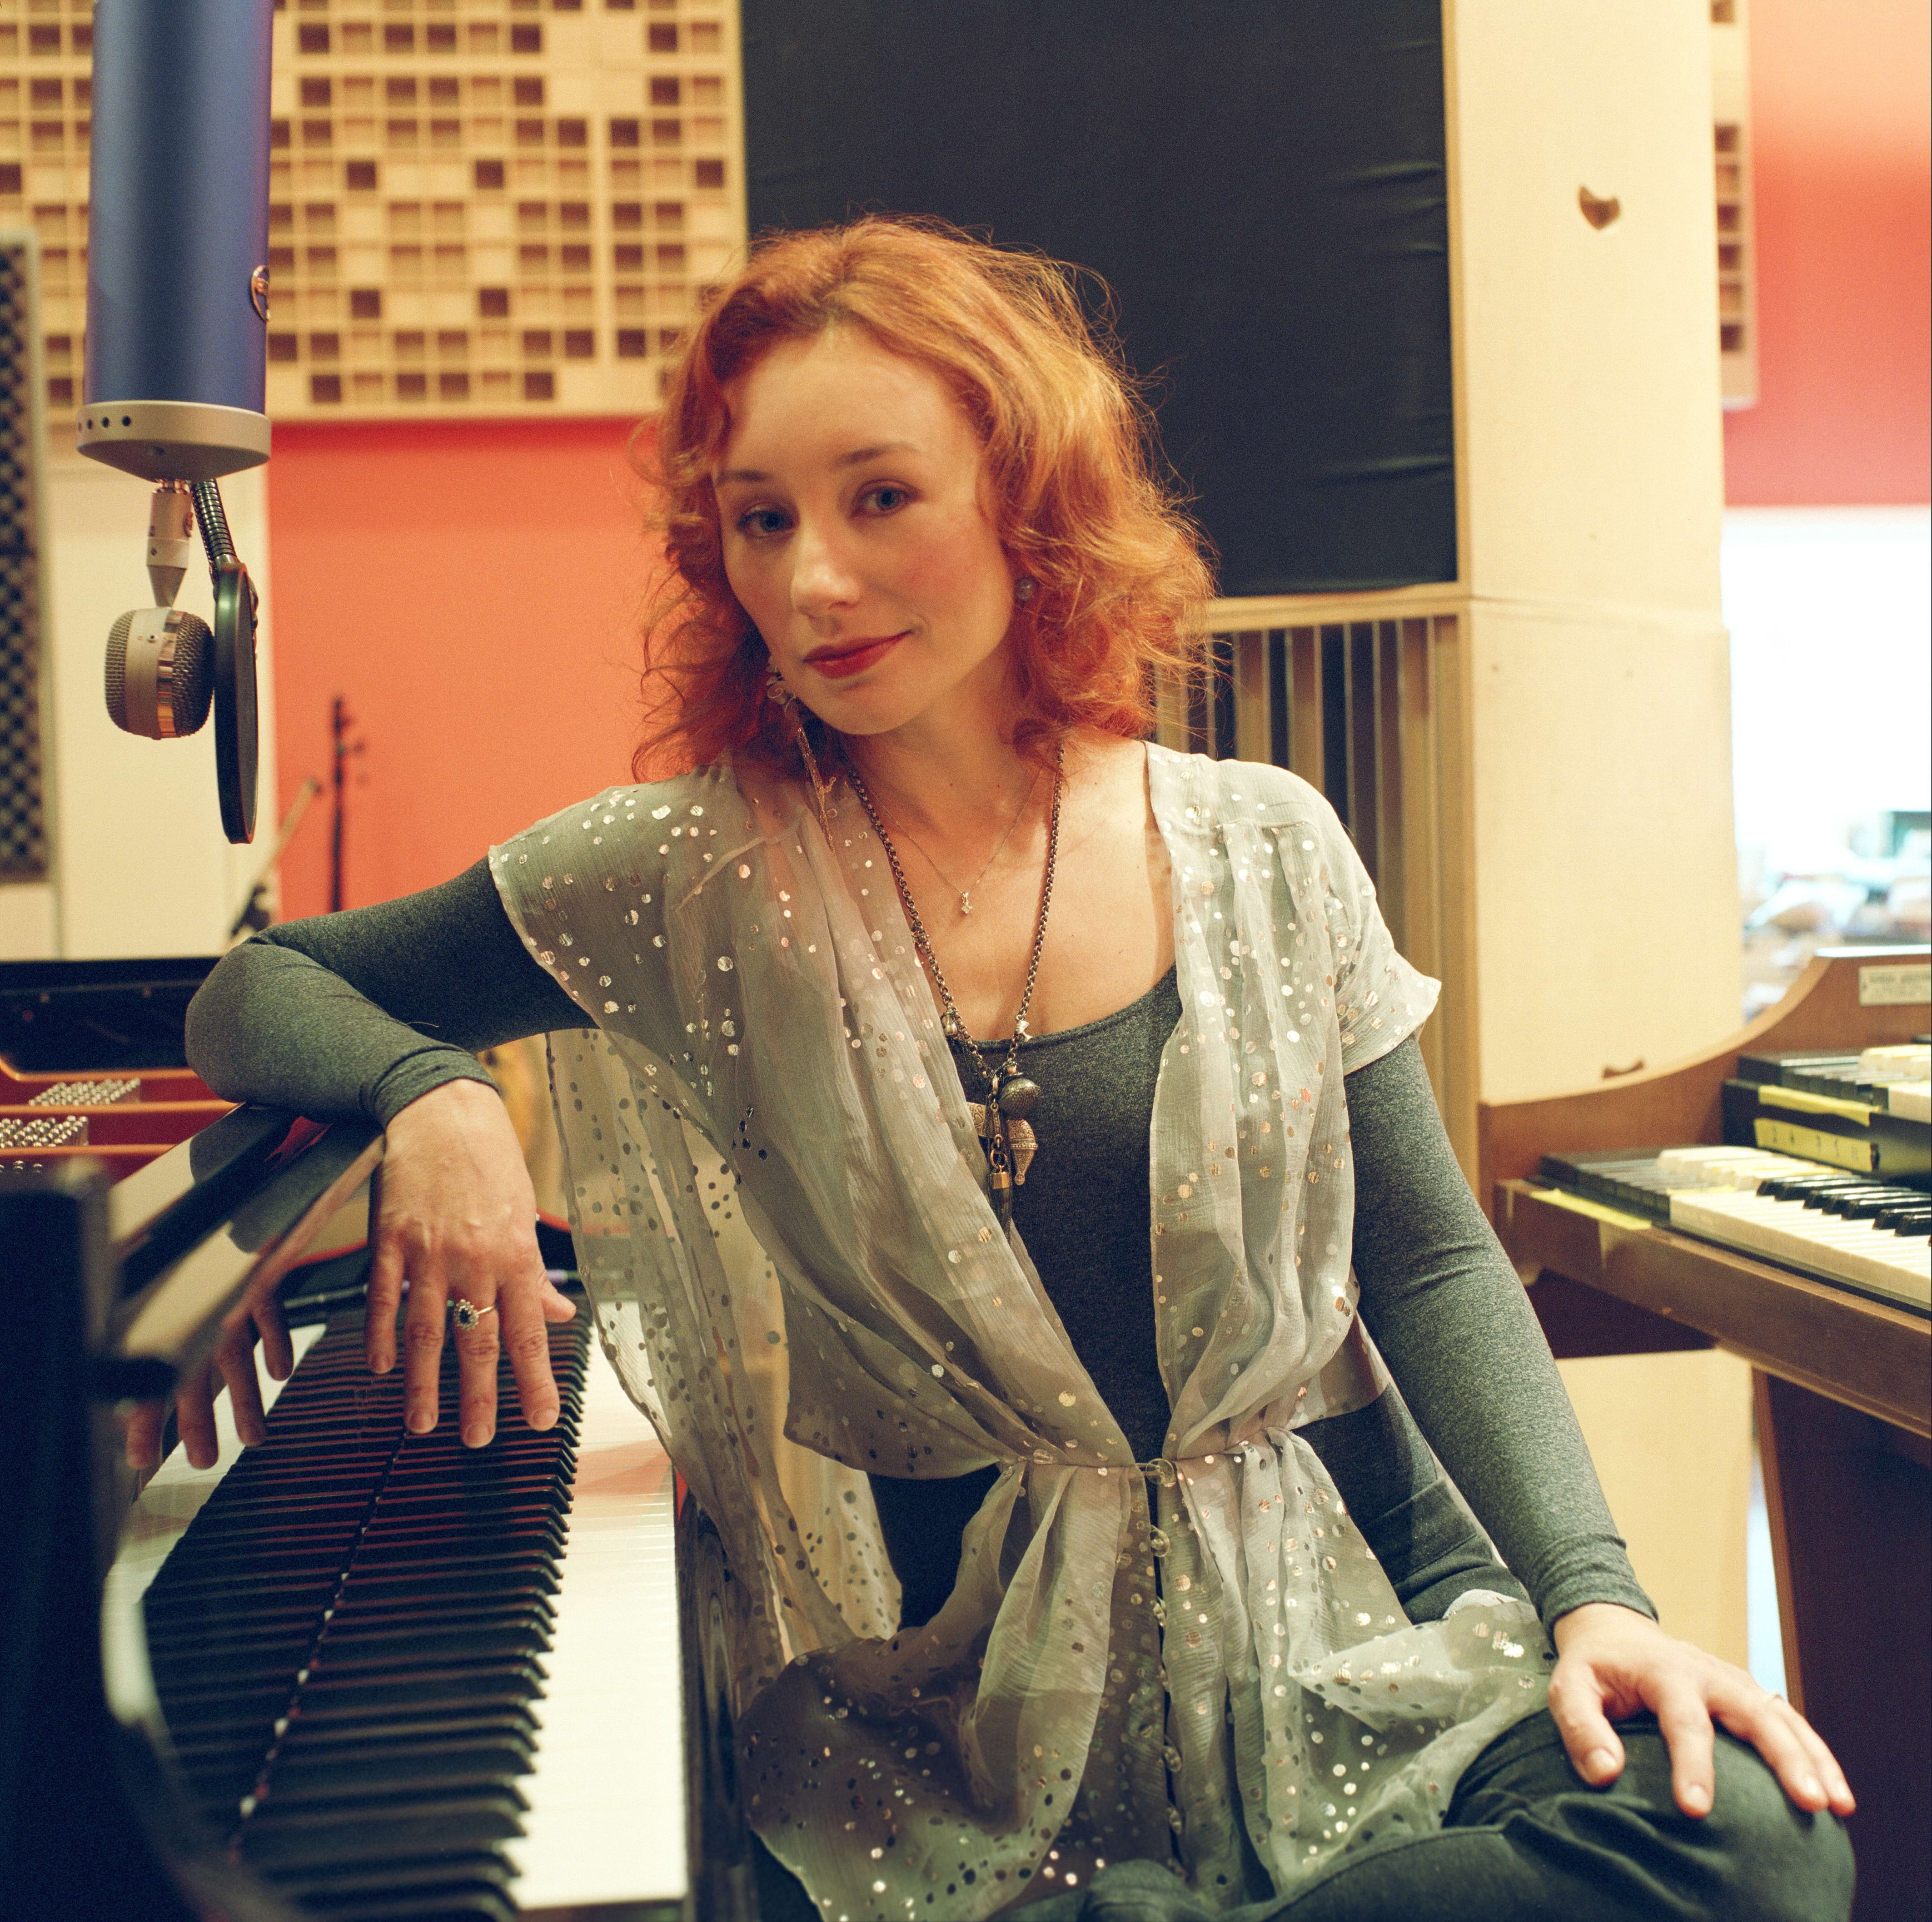 Tori Amos, women, necklace, singer, redhead, one person, piano